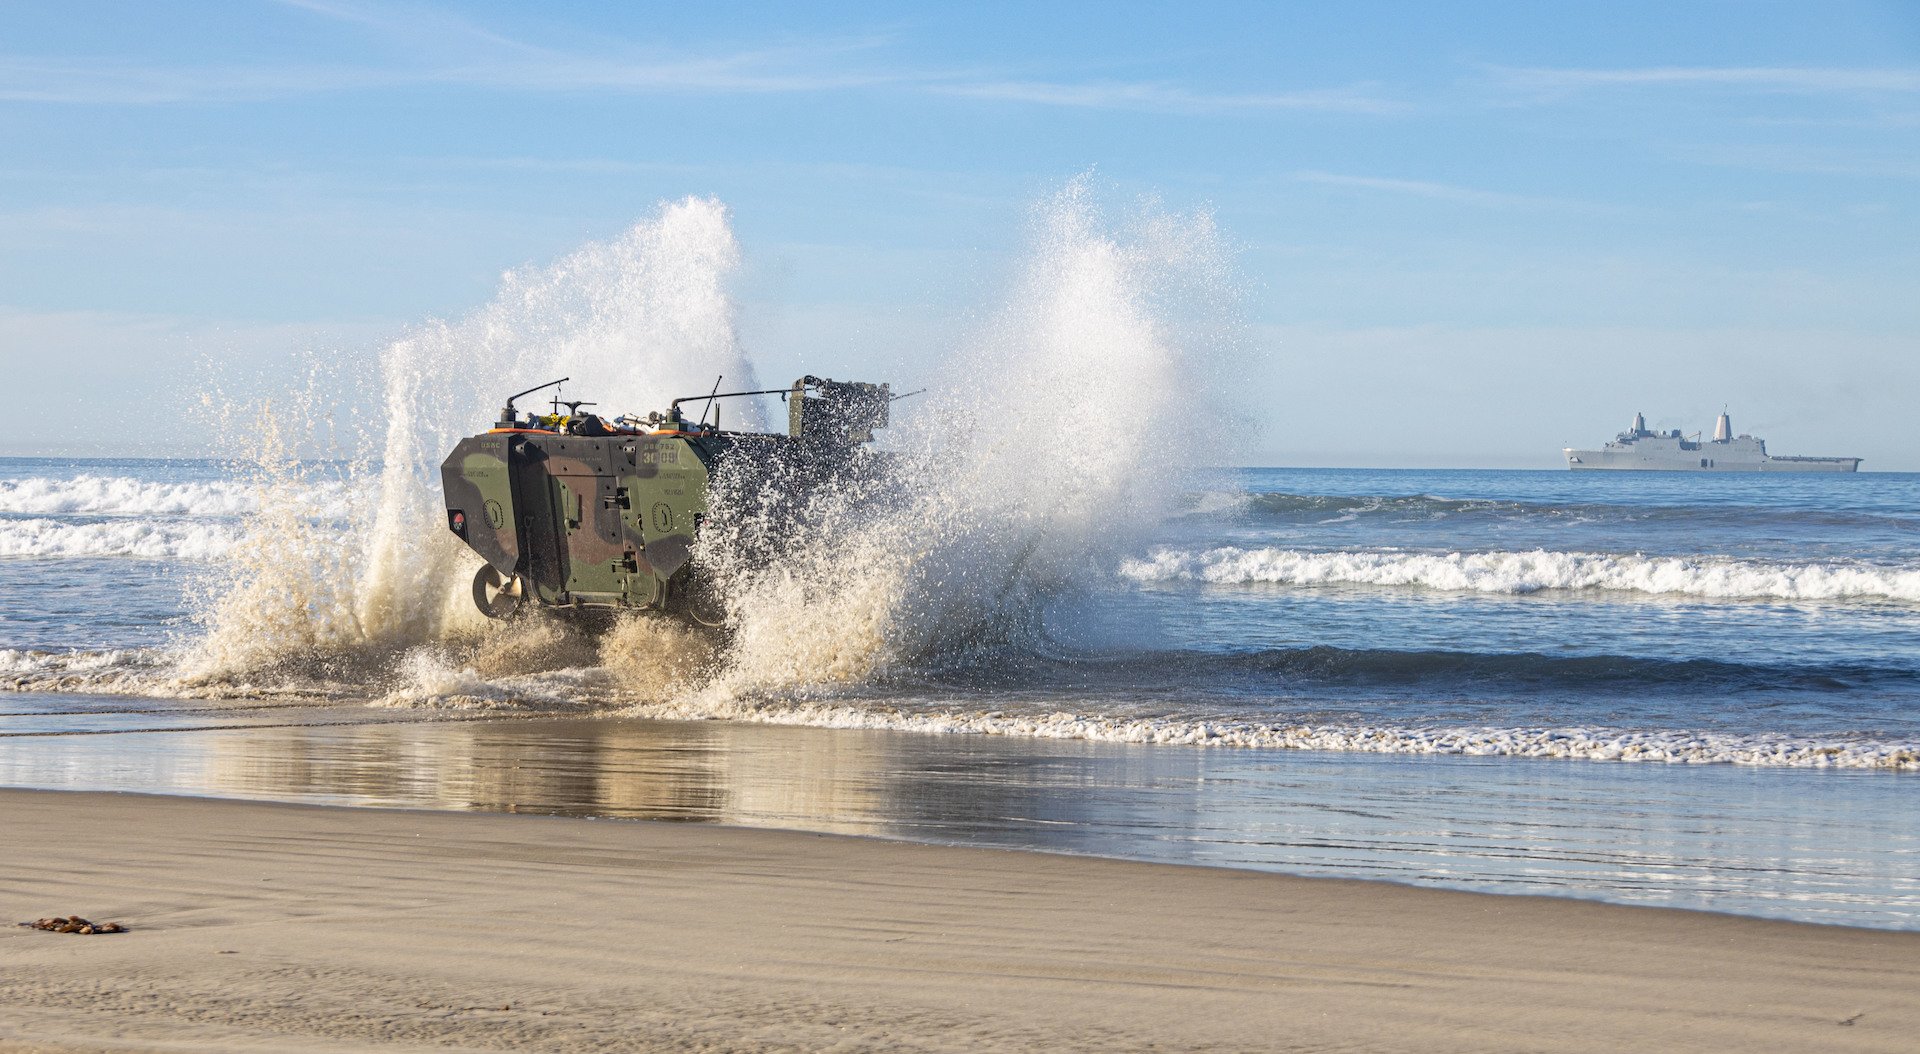 US Marines assigned to the 3rd Assault Amphibian Battalion, 1st Marine Division, drive an Amphibious Combat Vehicle into the water toward the USS Anchorage at Camp Pendleton, California, Feb. 12, 2022. US Marine Corps photo by Lance Cpl. Willow Marshall.